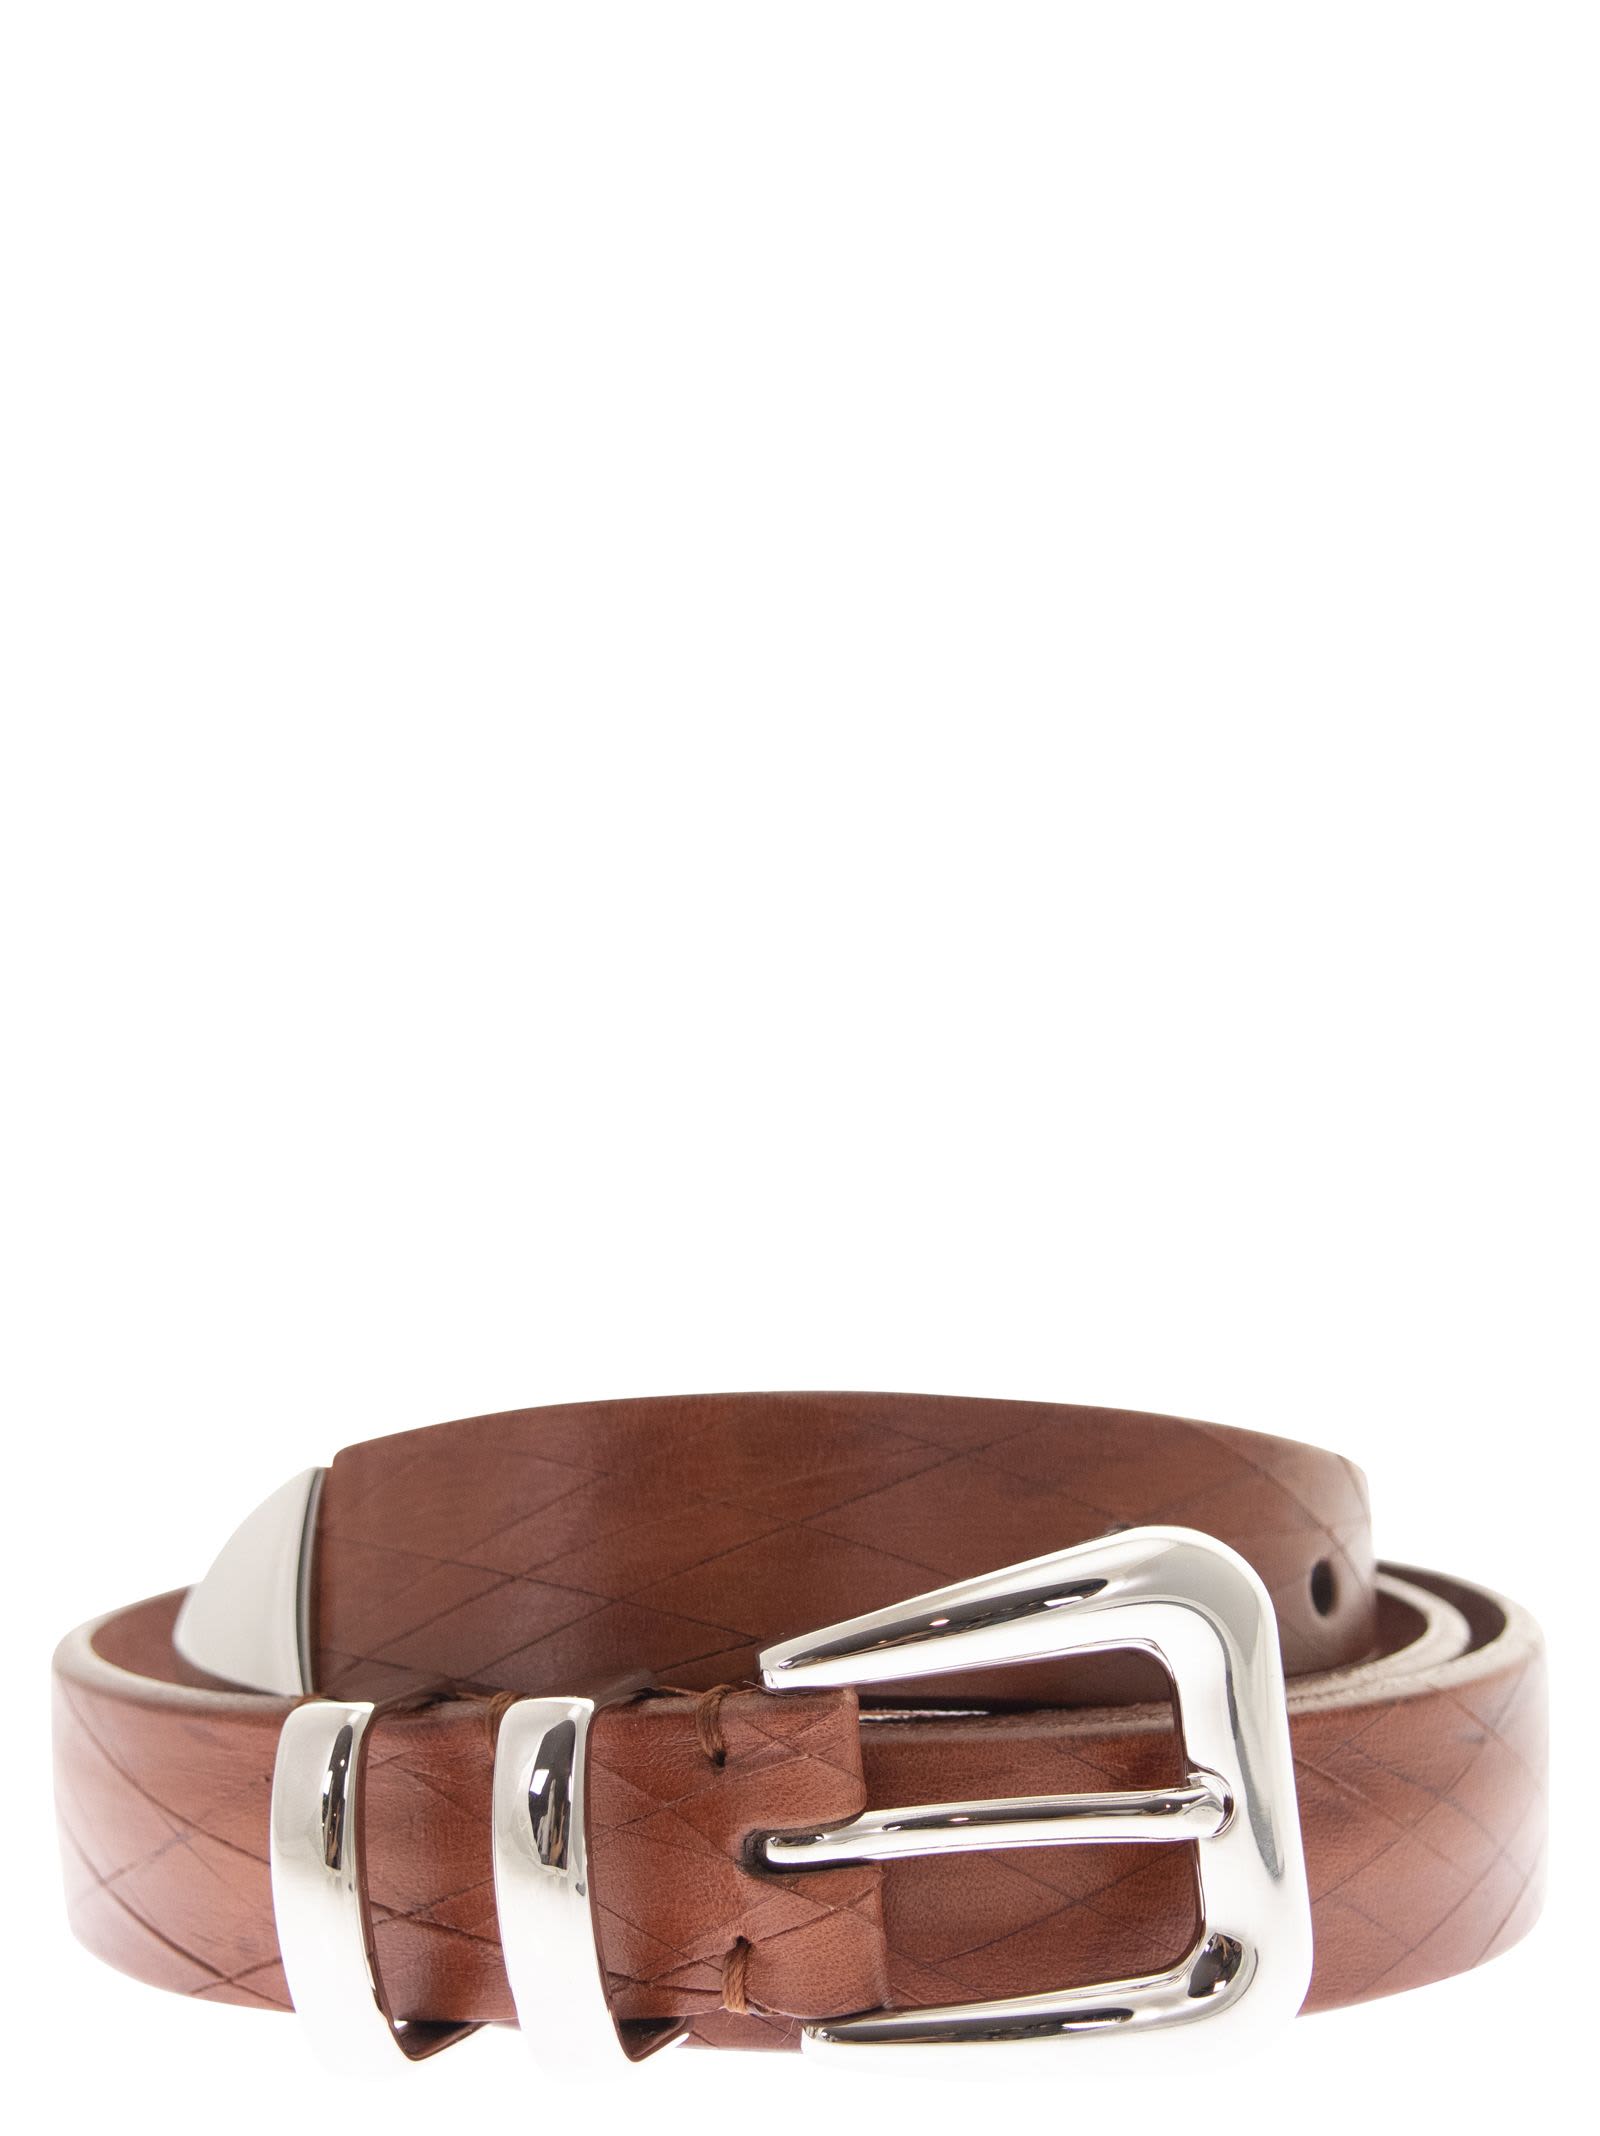 Brunello Cucinelli Leather Scratched Belt With Tip